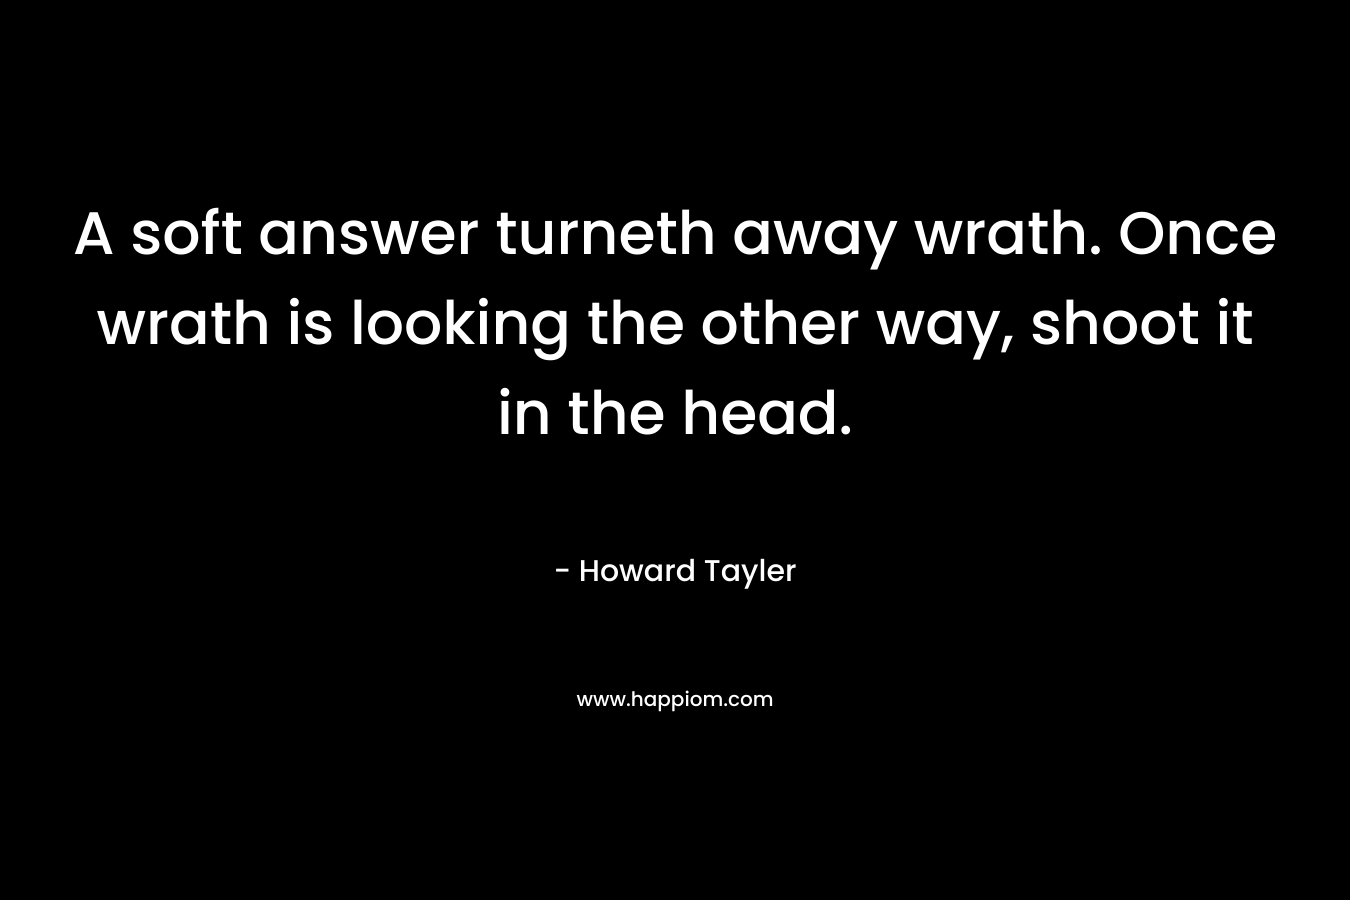 A soft answer turneth away wrath. Once wrath is looking the other way, shoot it in the head. – Howard Tayler